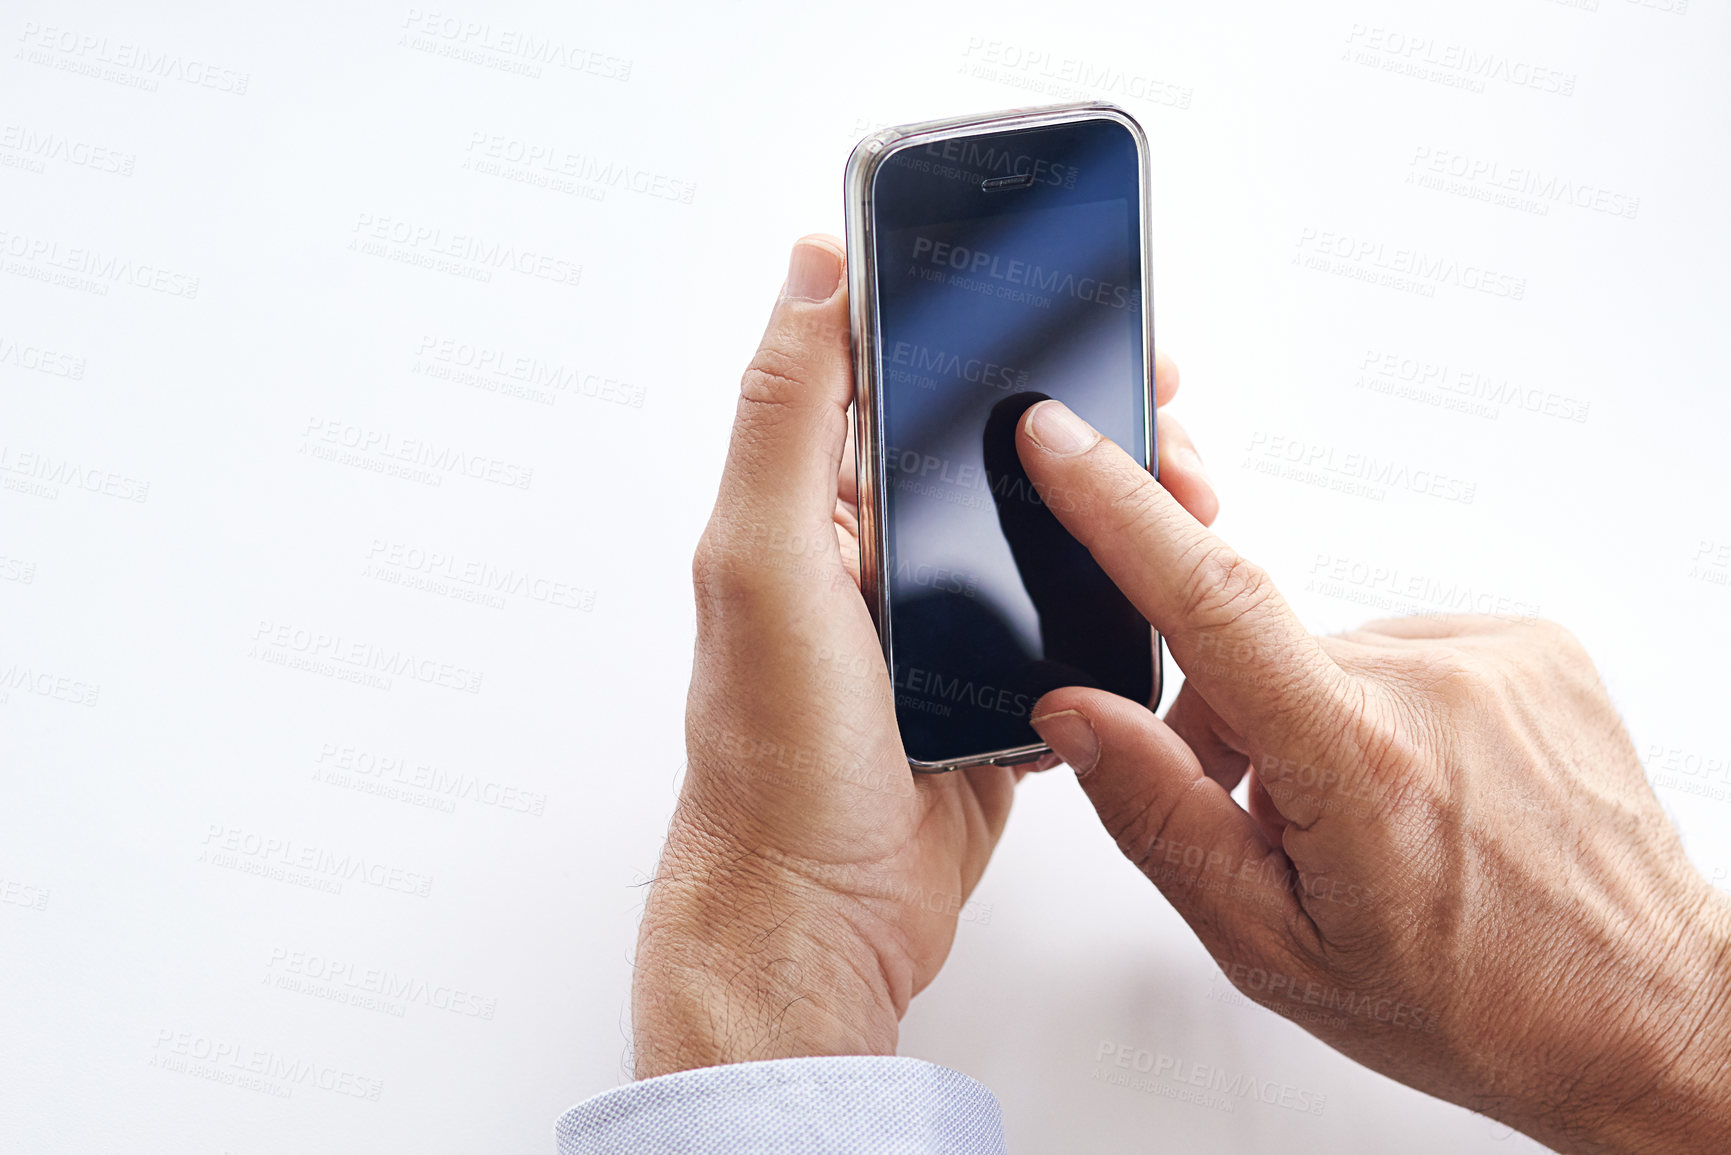 Buy stock photo Closeup shot of a businessman using a cellphone against a white background